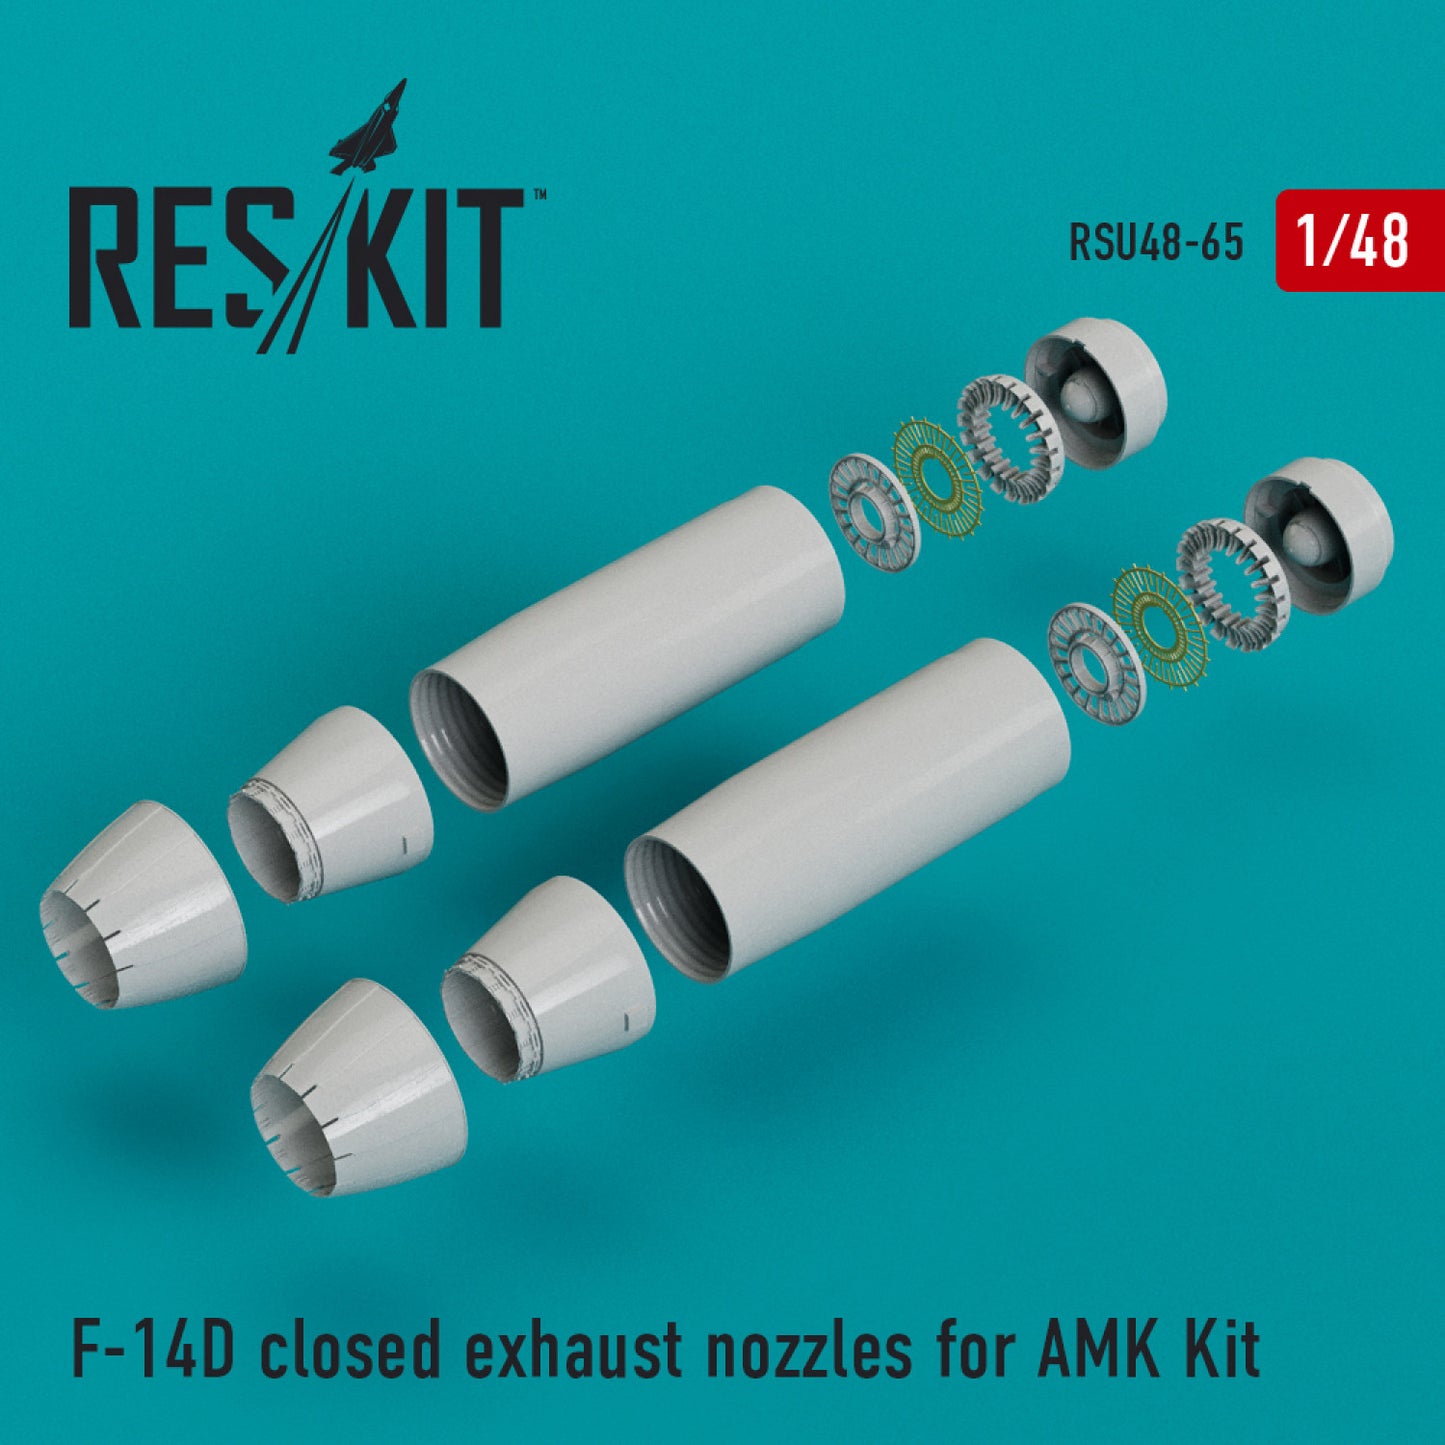 Res/Kit 1:48 F-14D closed exhaust nozzles for AMK Kit